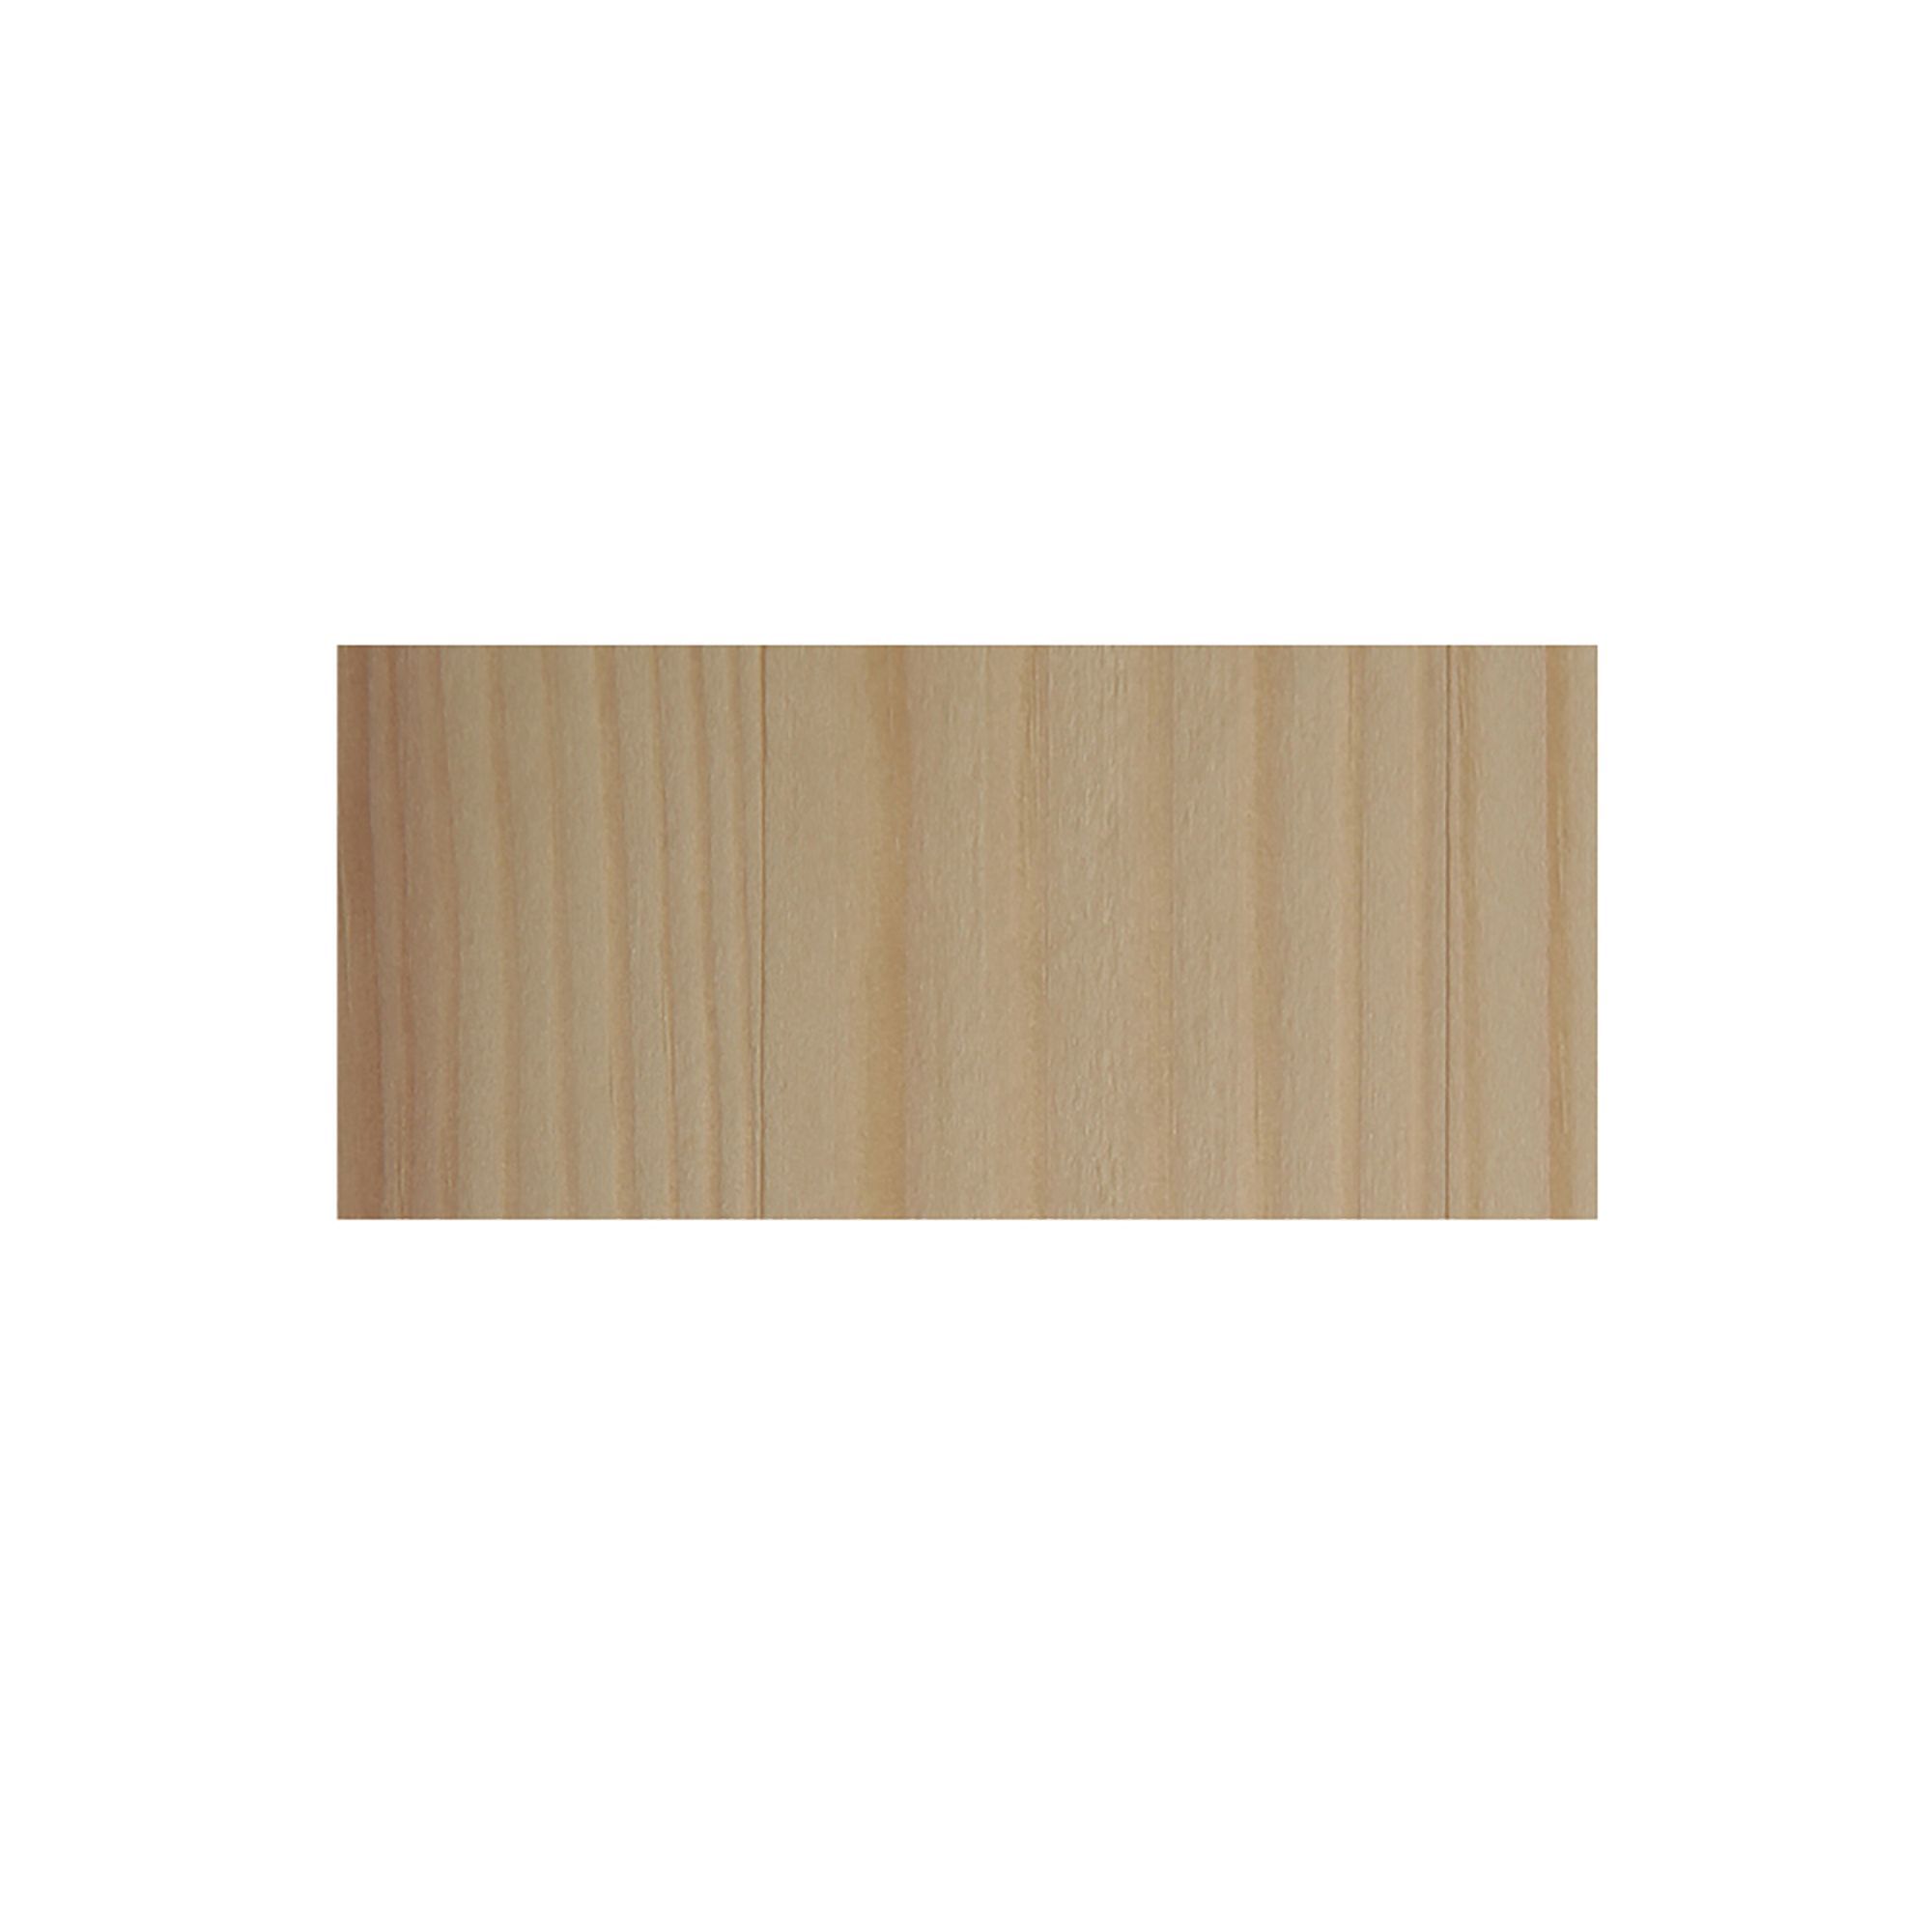 Cheshire Mouldings Smooth Planed Square edge Pine Stripwood (L)0.9m (W)36mm (T)10.5mm STPN45